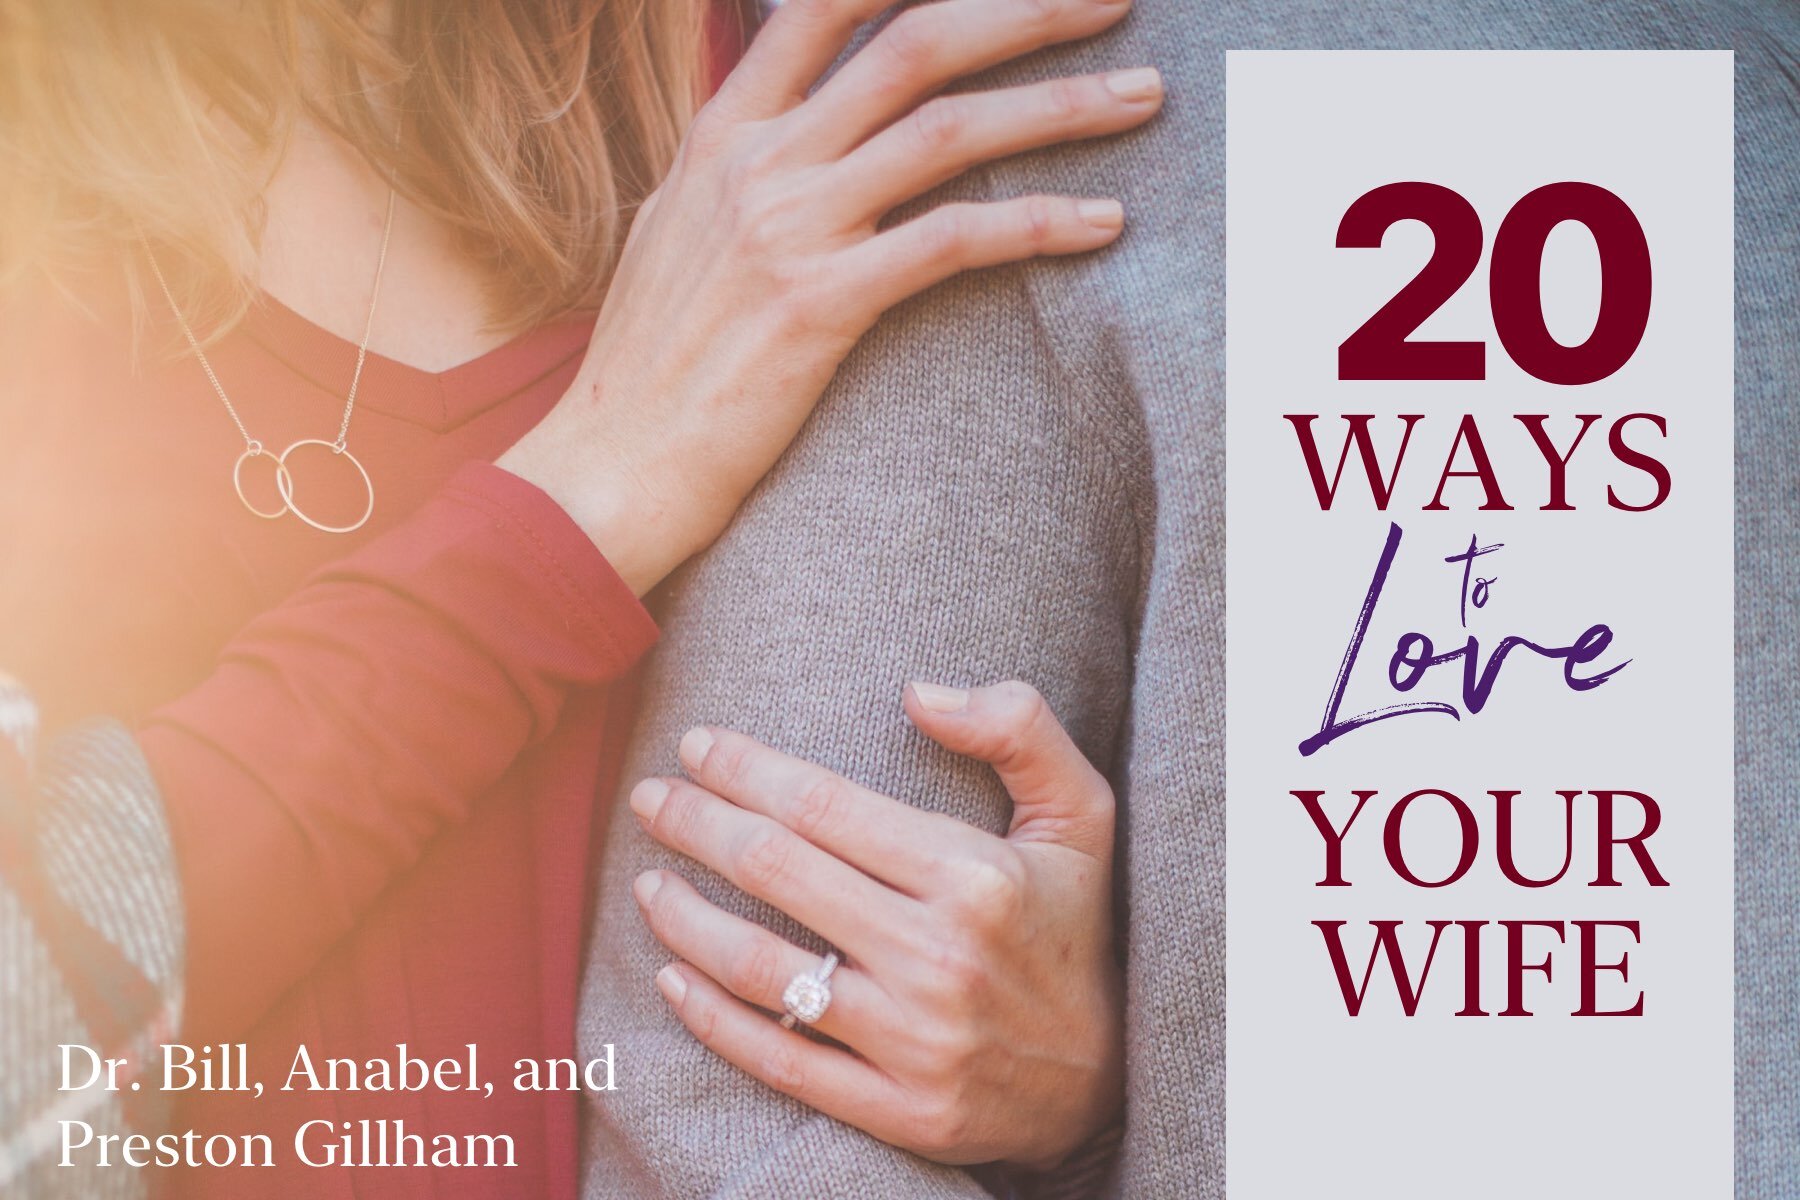 20 Ways to Love Your Wife